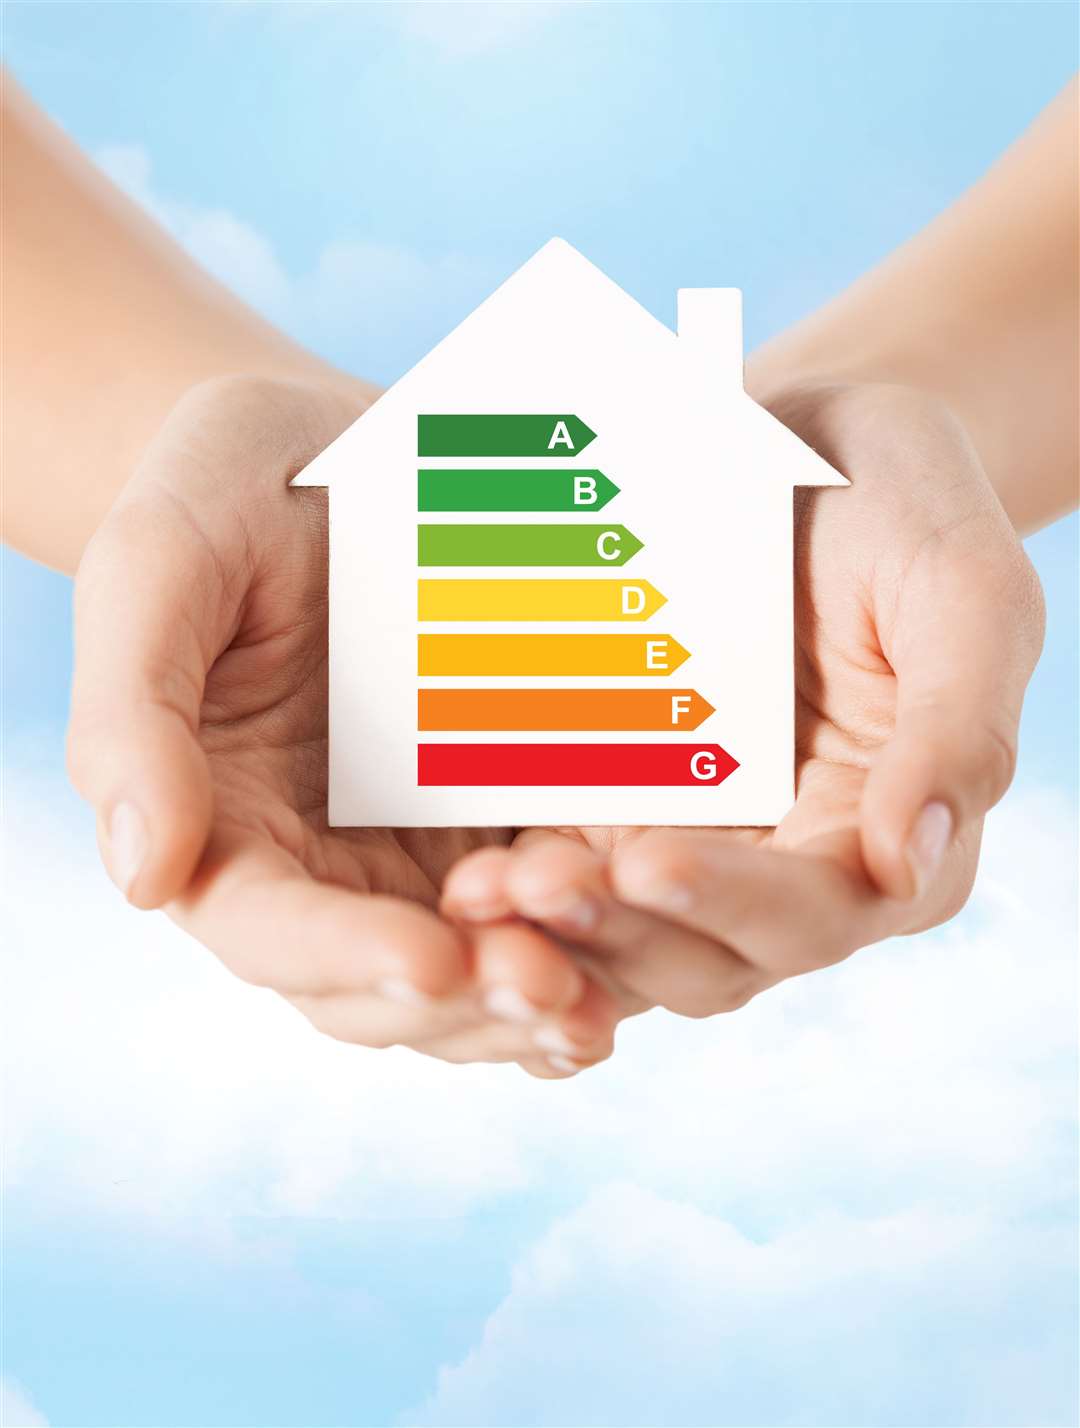 Energy efficiency must be tackled.